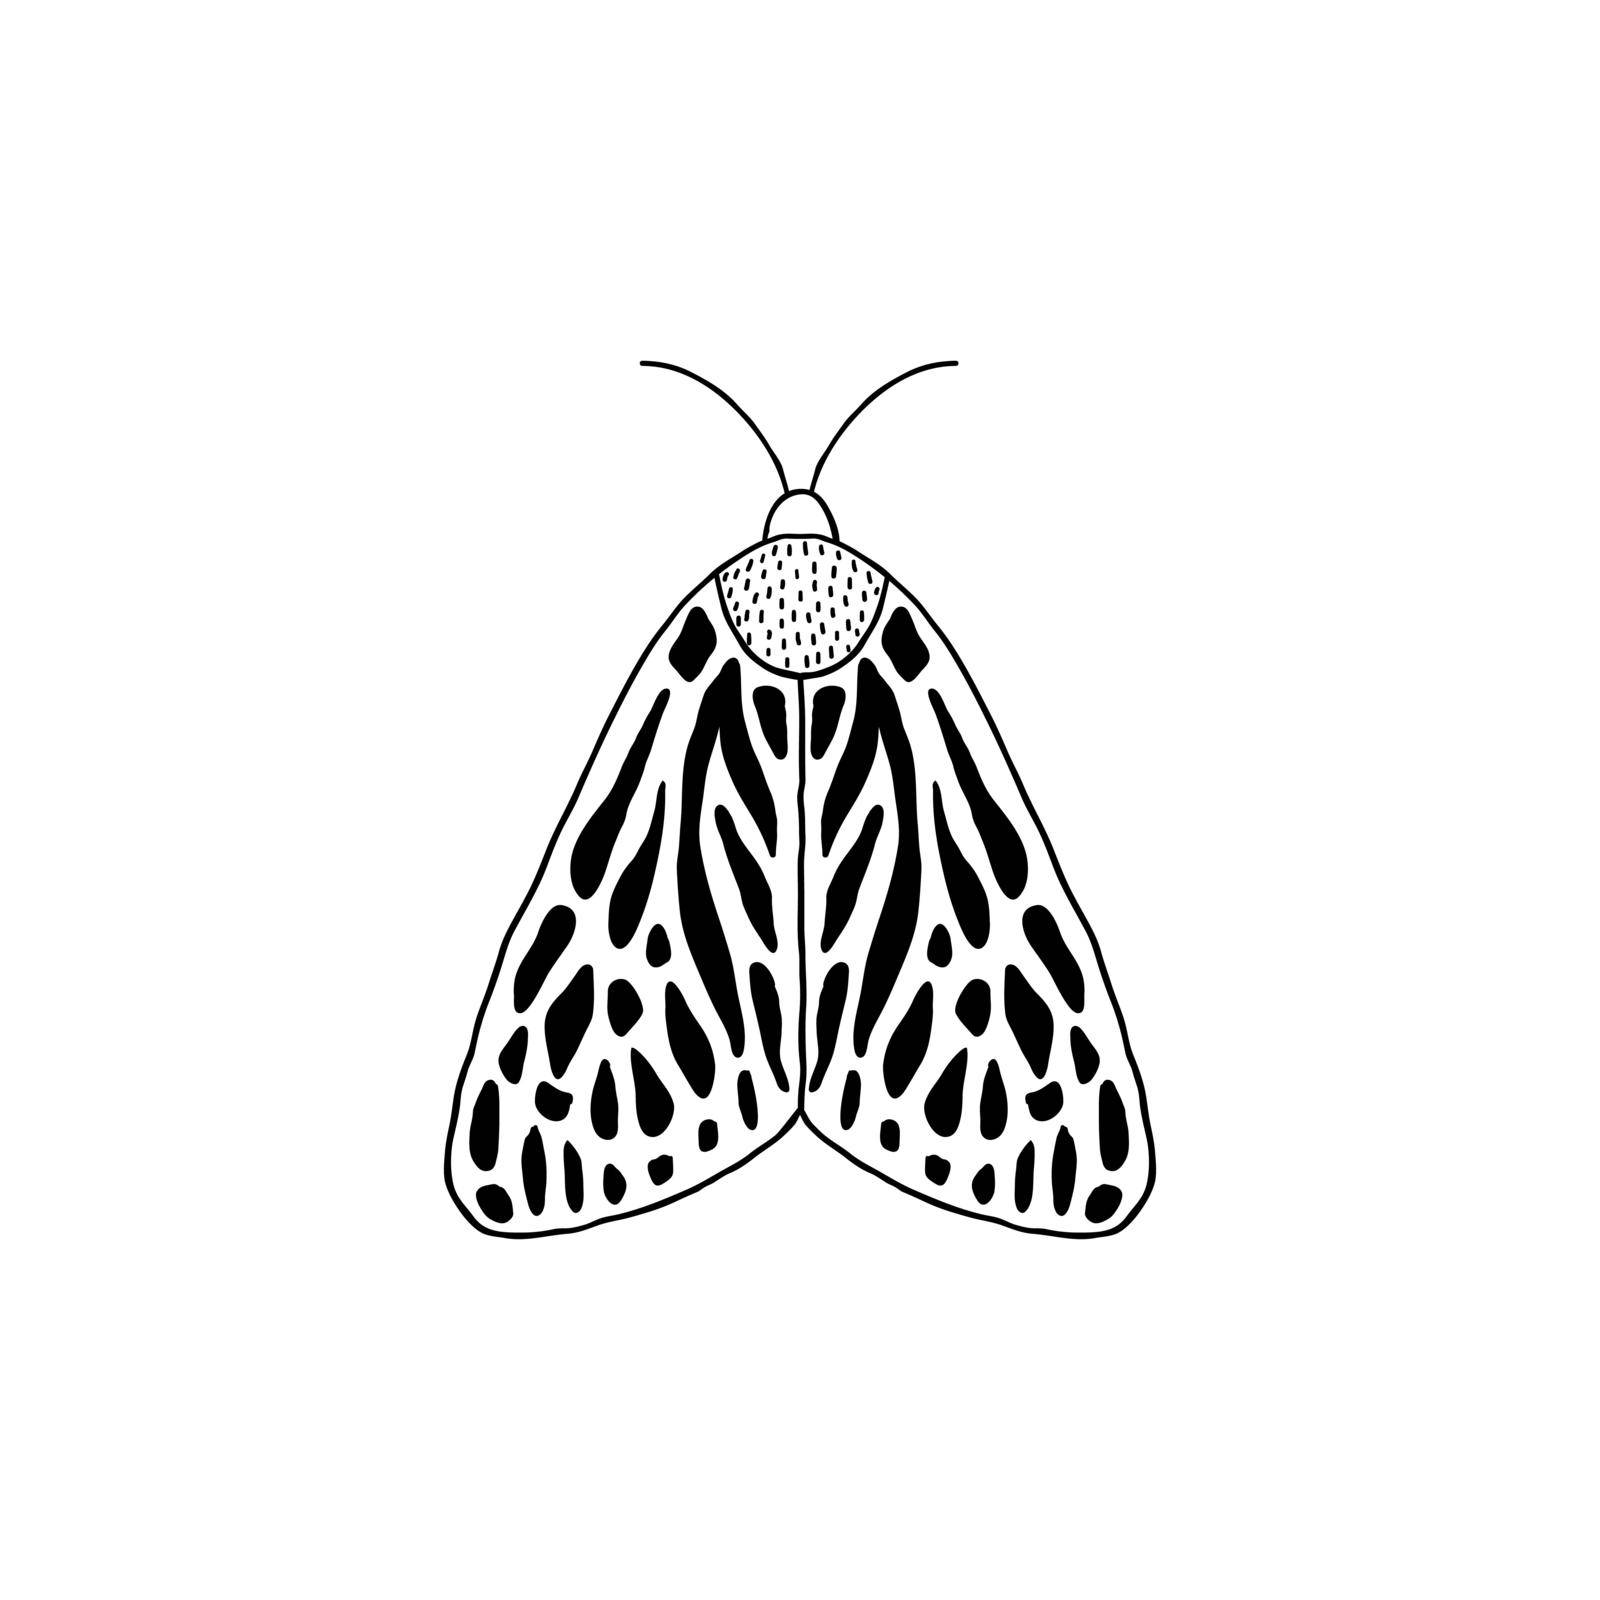 Moth in doodle style isolated on white background.
